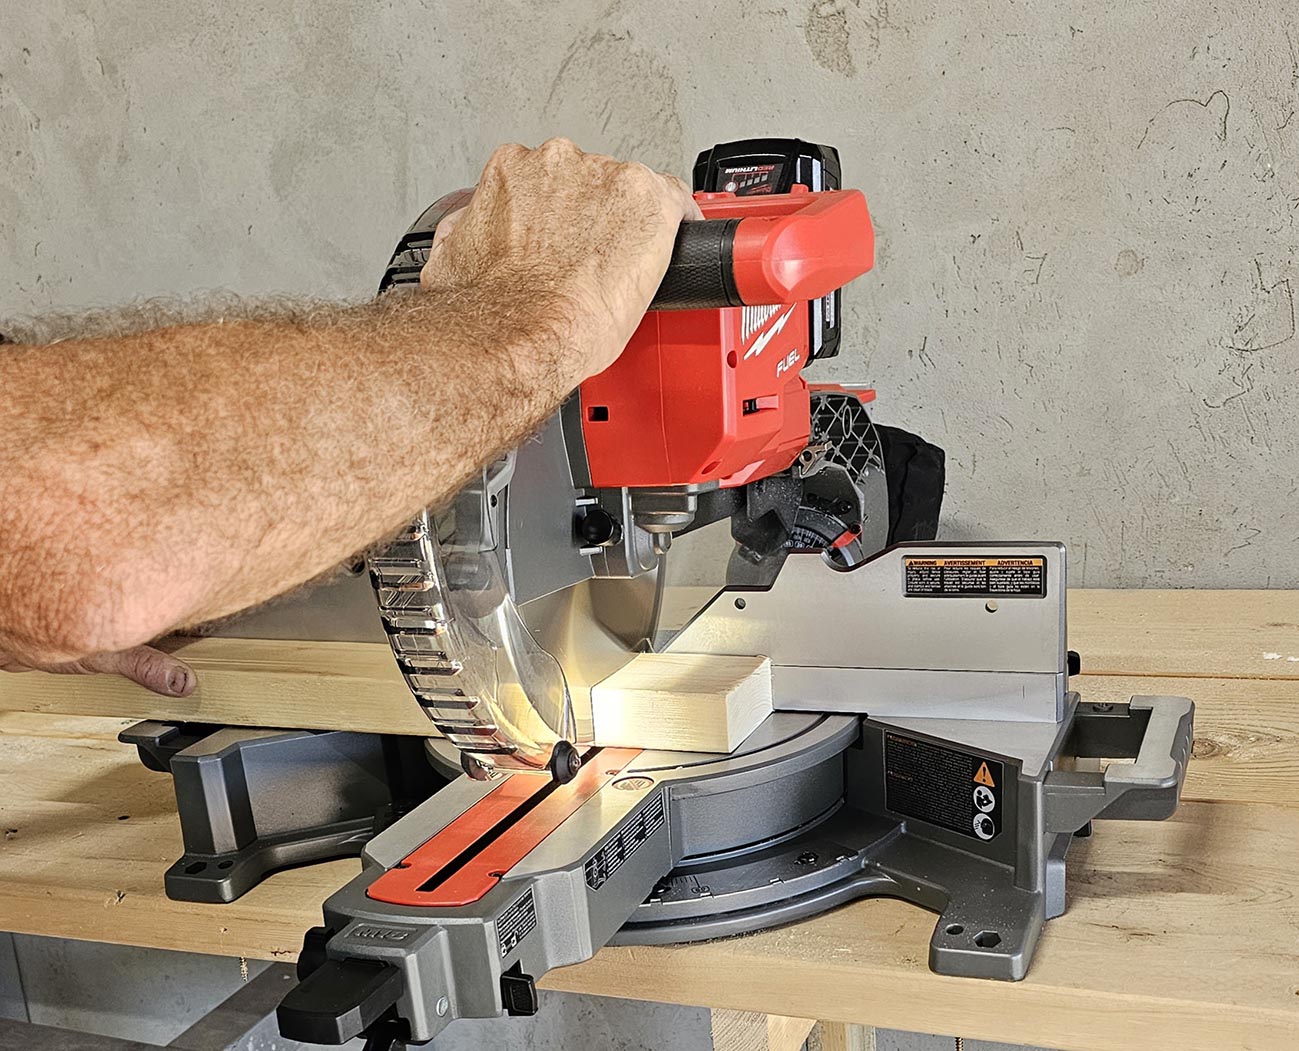 Contractor using a red Milwaukee 10-inch compound sliding miter saw to cut a 2 by 4.